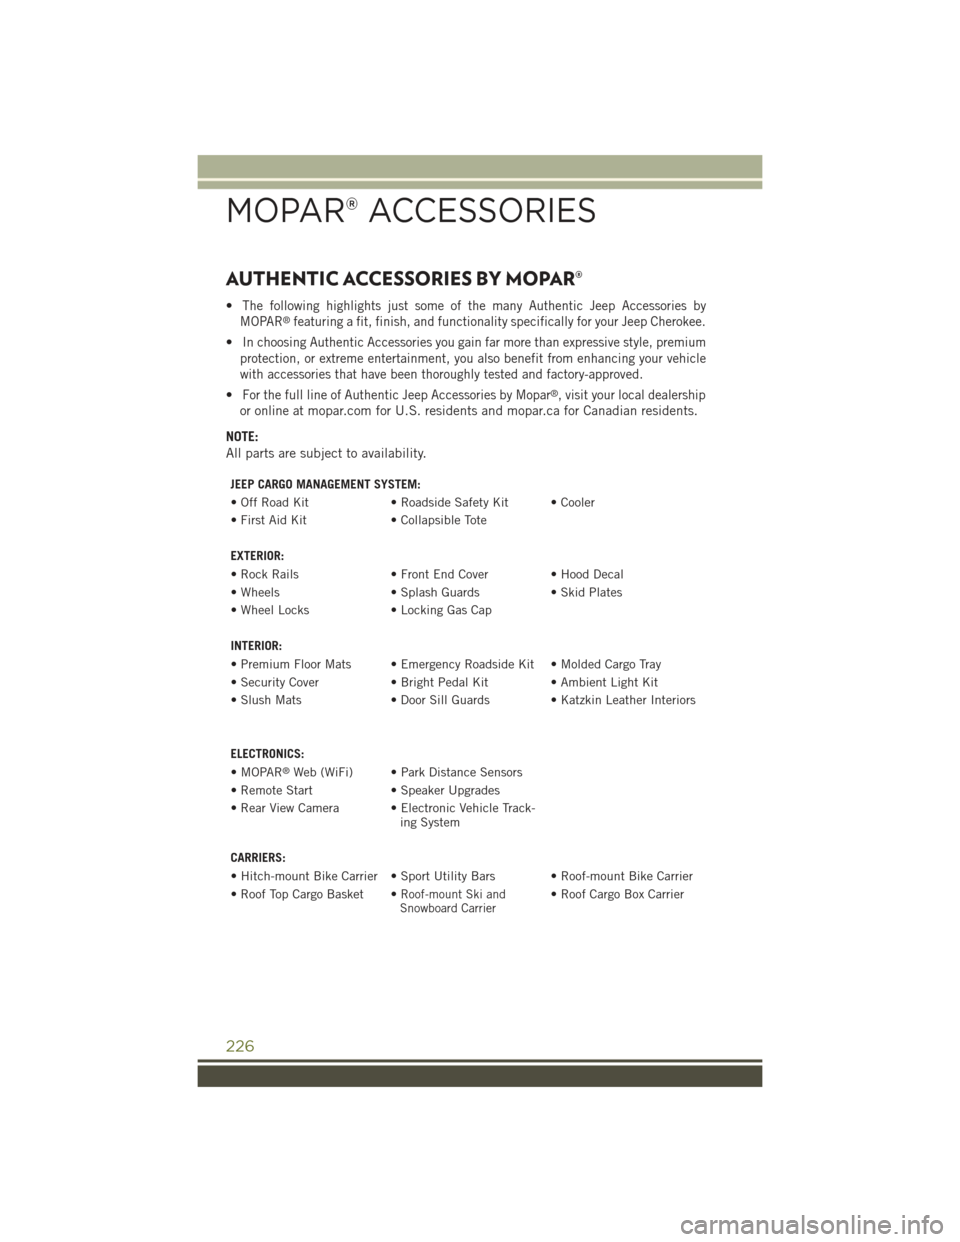 JEEP CHEROKEE 2015 KL / 5.G User Guide AUTHENTIC ACCESSORIES BY MOPAR®
•The following highlights just some of the many Authentic Jeep Accessories by
MOPAR®featuring a fit, finish, and functionality specifically for your Jeep Cherokee.
